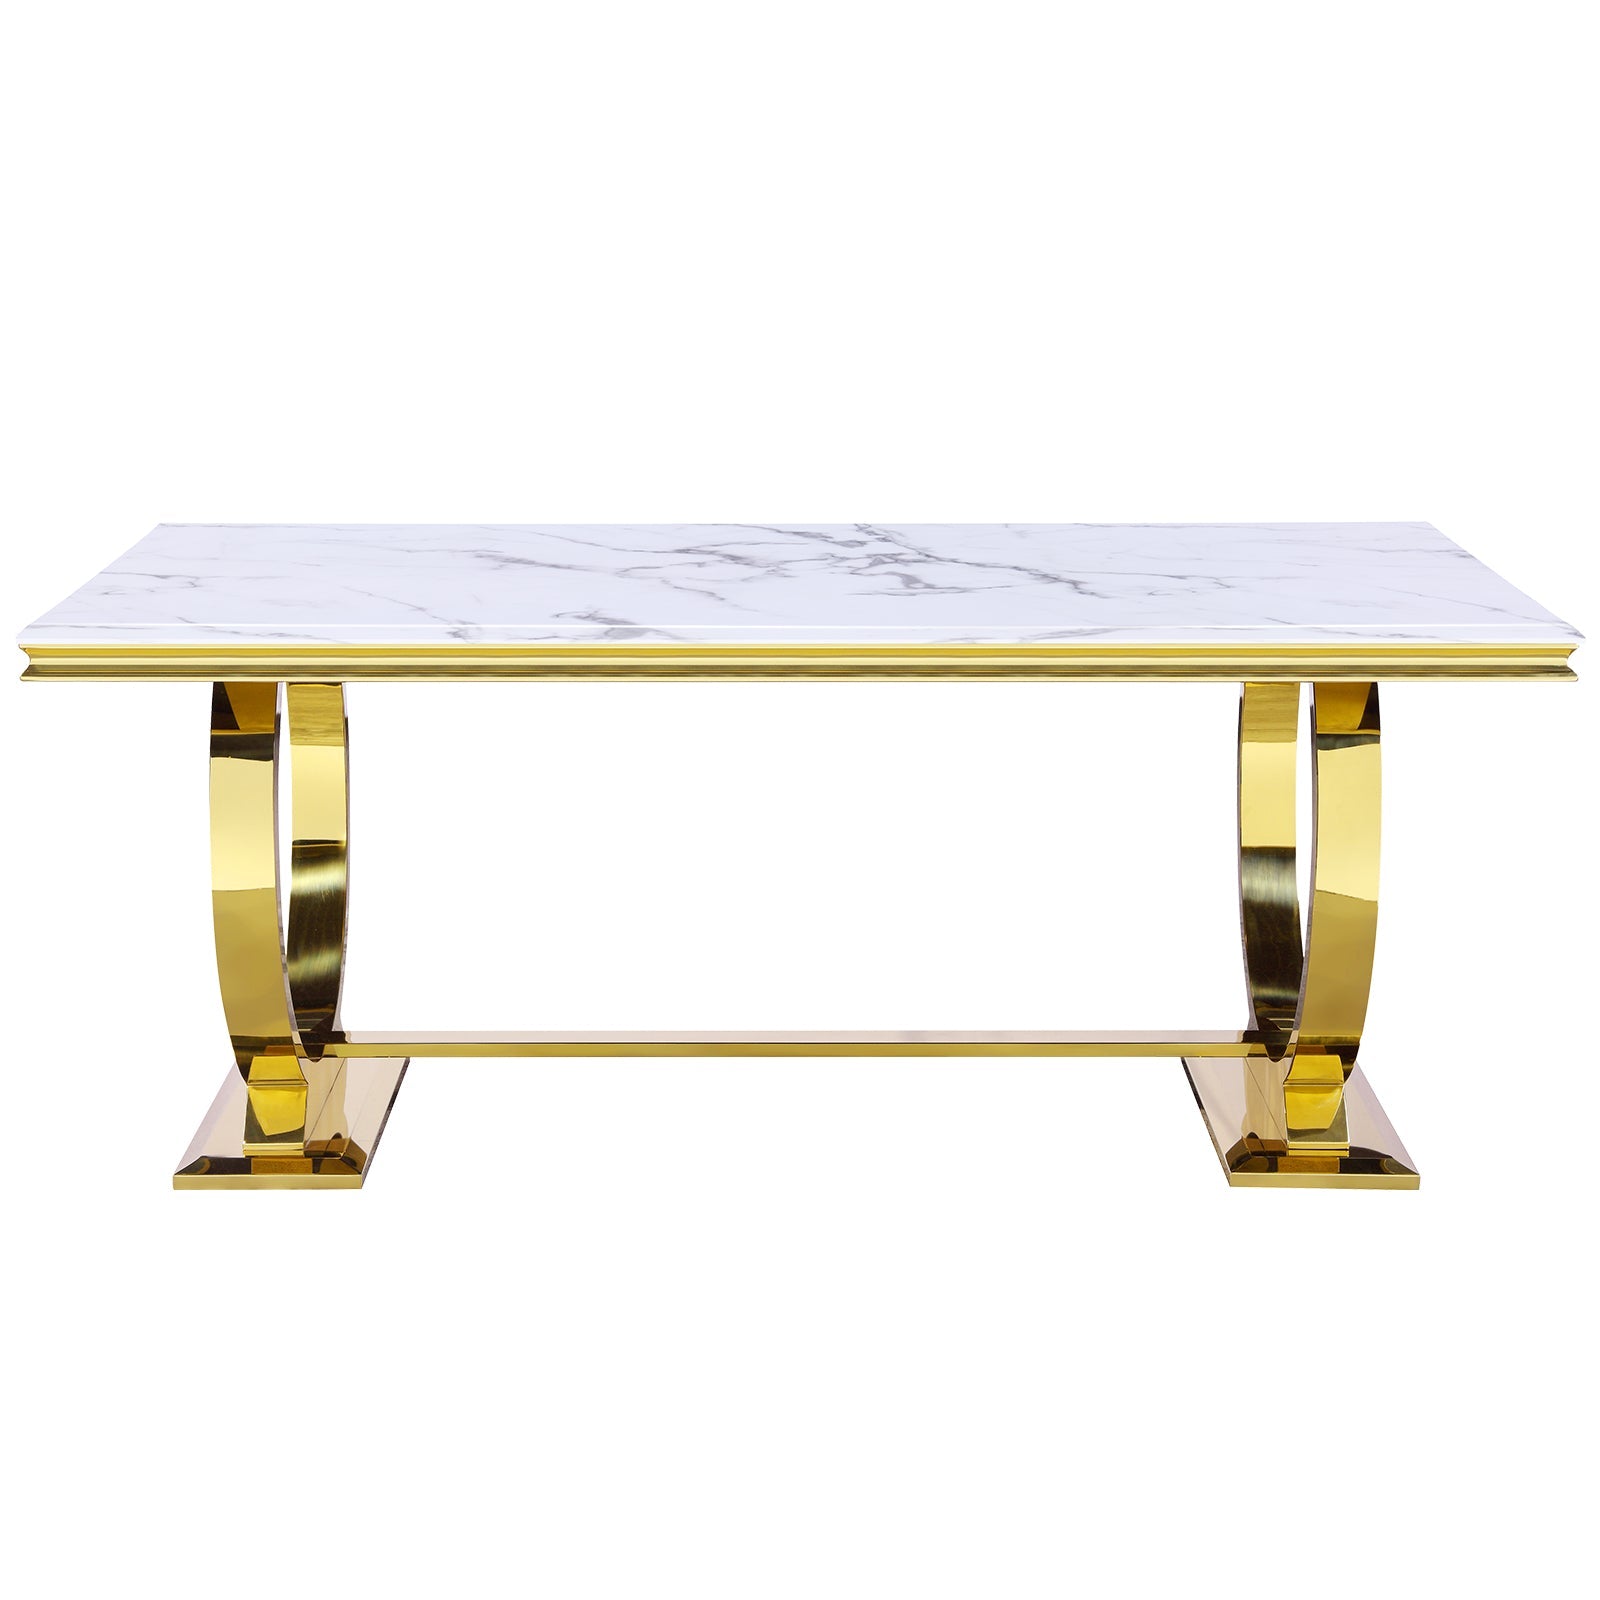 613-Set | AUZ White and Gold Dining room Sets for 6